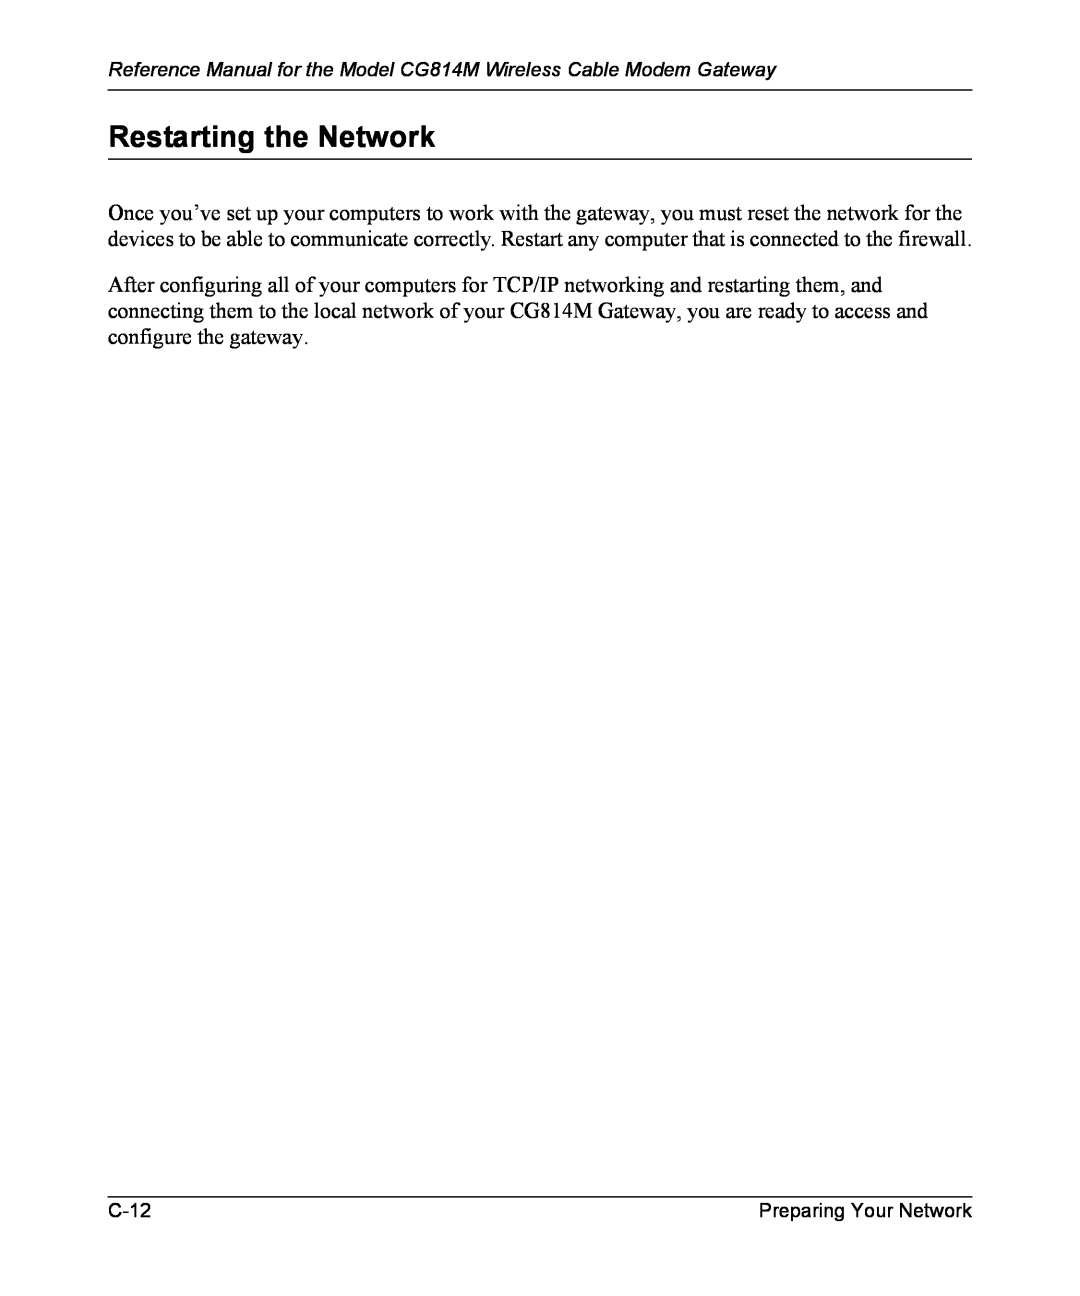 NETGEAR manual Restarting the Network, Reference Manual for the Model CG814M Wireless Cable Modem Gateway, C-12 